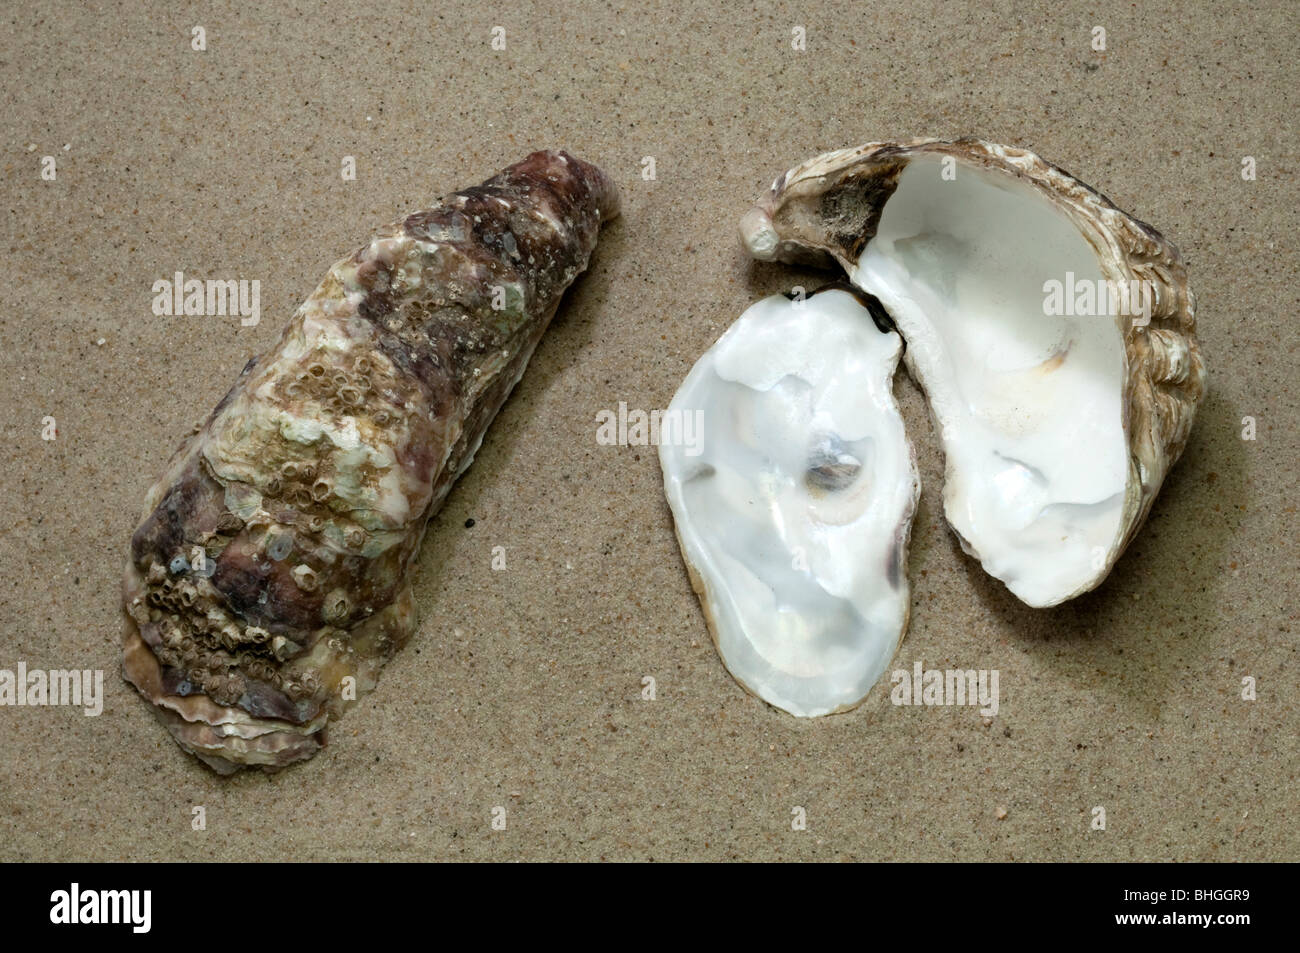 Pacific Oyster, Japanese Oyster (Crassostrea gigas), shells on beach sand. Stock Photo